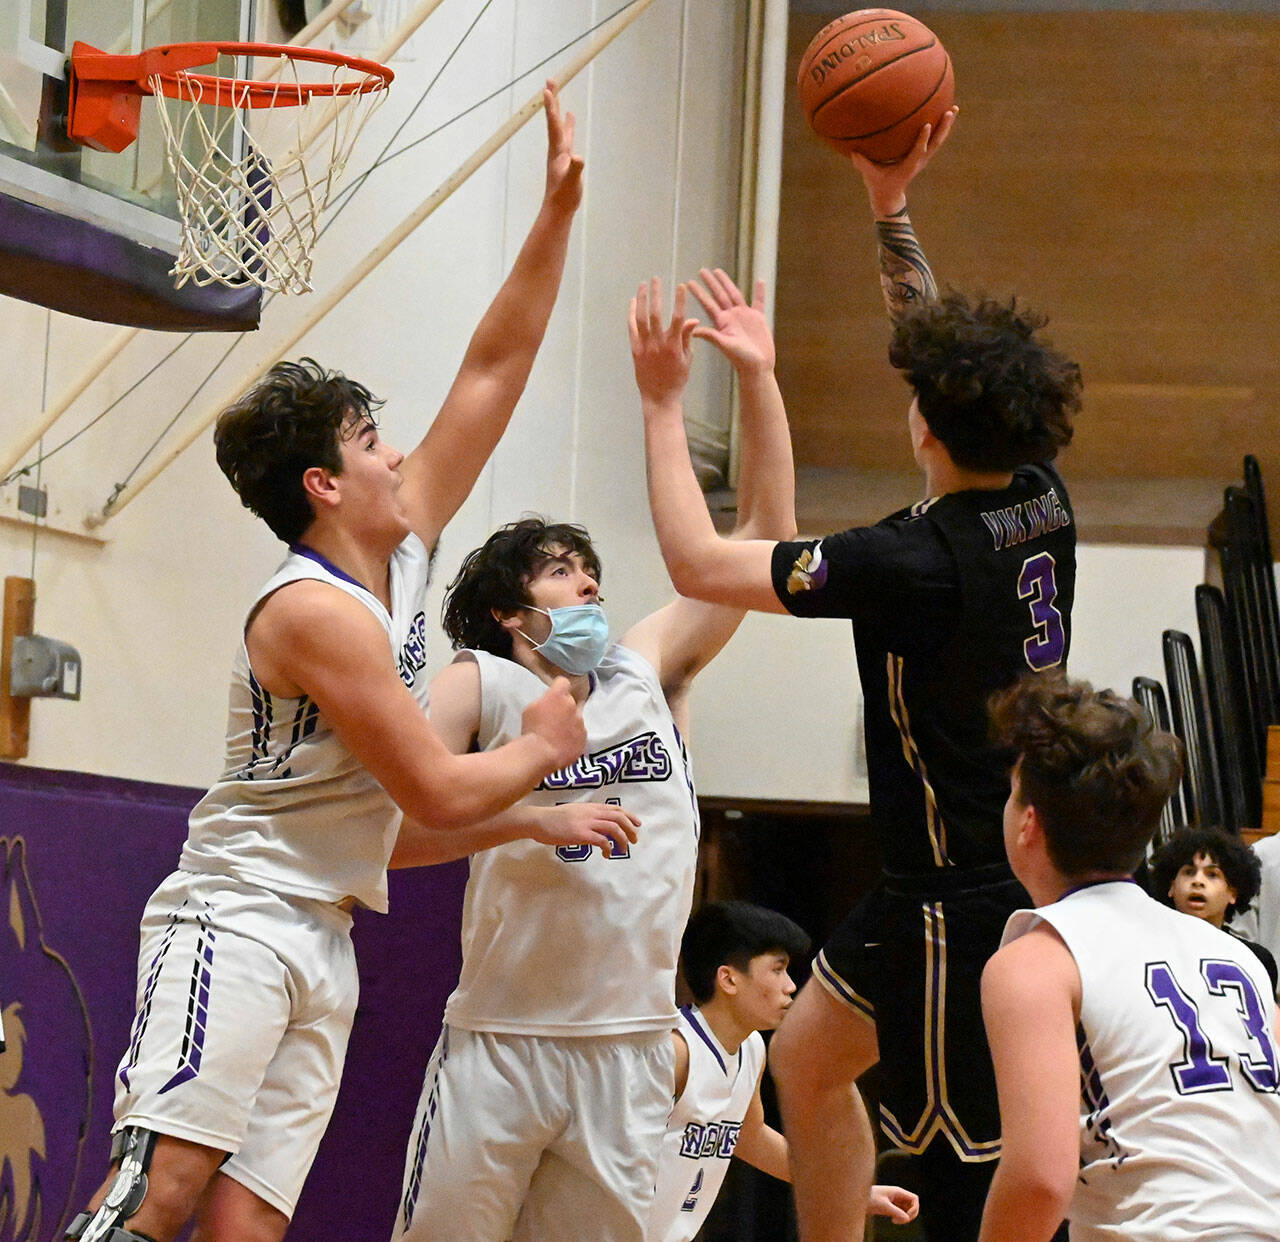 Sequim Gazette photo by Michael Dashiell
Sequim’s Isaiah Moore, left, and Cole Smithson, look to block a shot by North Kitsap’s Aiden Olmstead in the second half of the visiting Vikings’ 78-40 win over Sequim on Jan. 20.